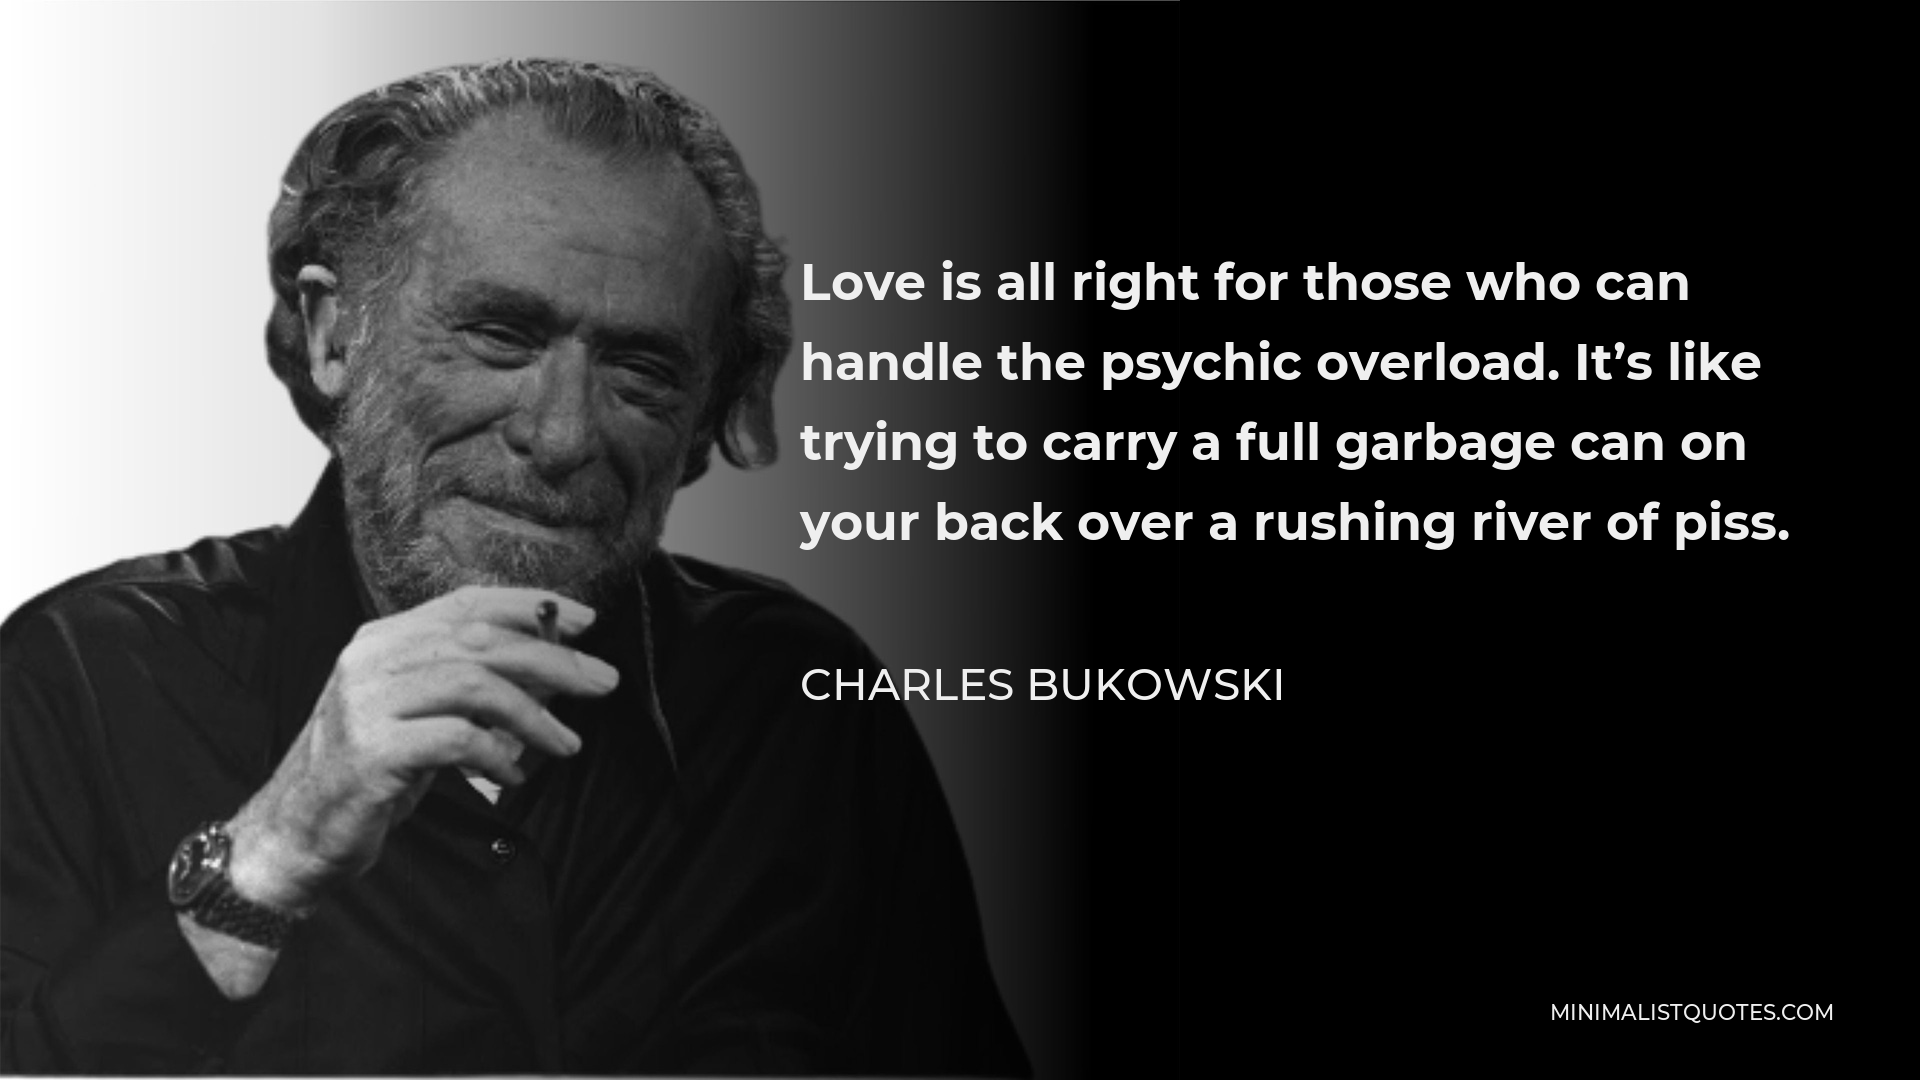 Charles Bukowski Quote - Love is all right for those who can handle the psychic overload. It’s like trying to carry a full garbage can on your back over a rushing river of piss.